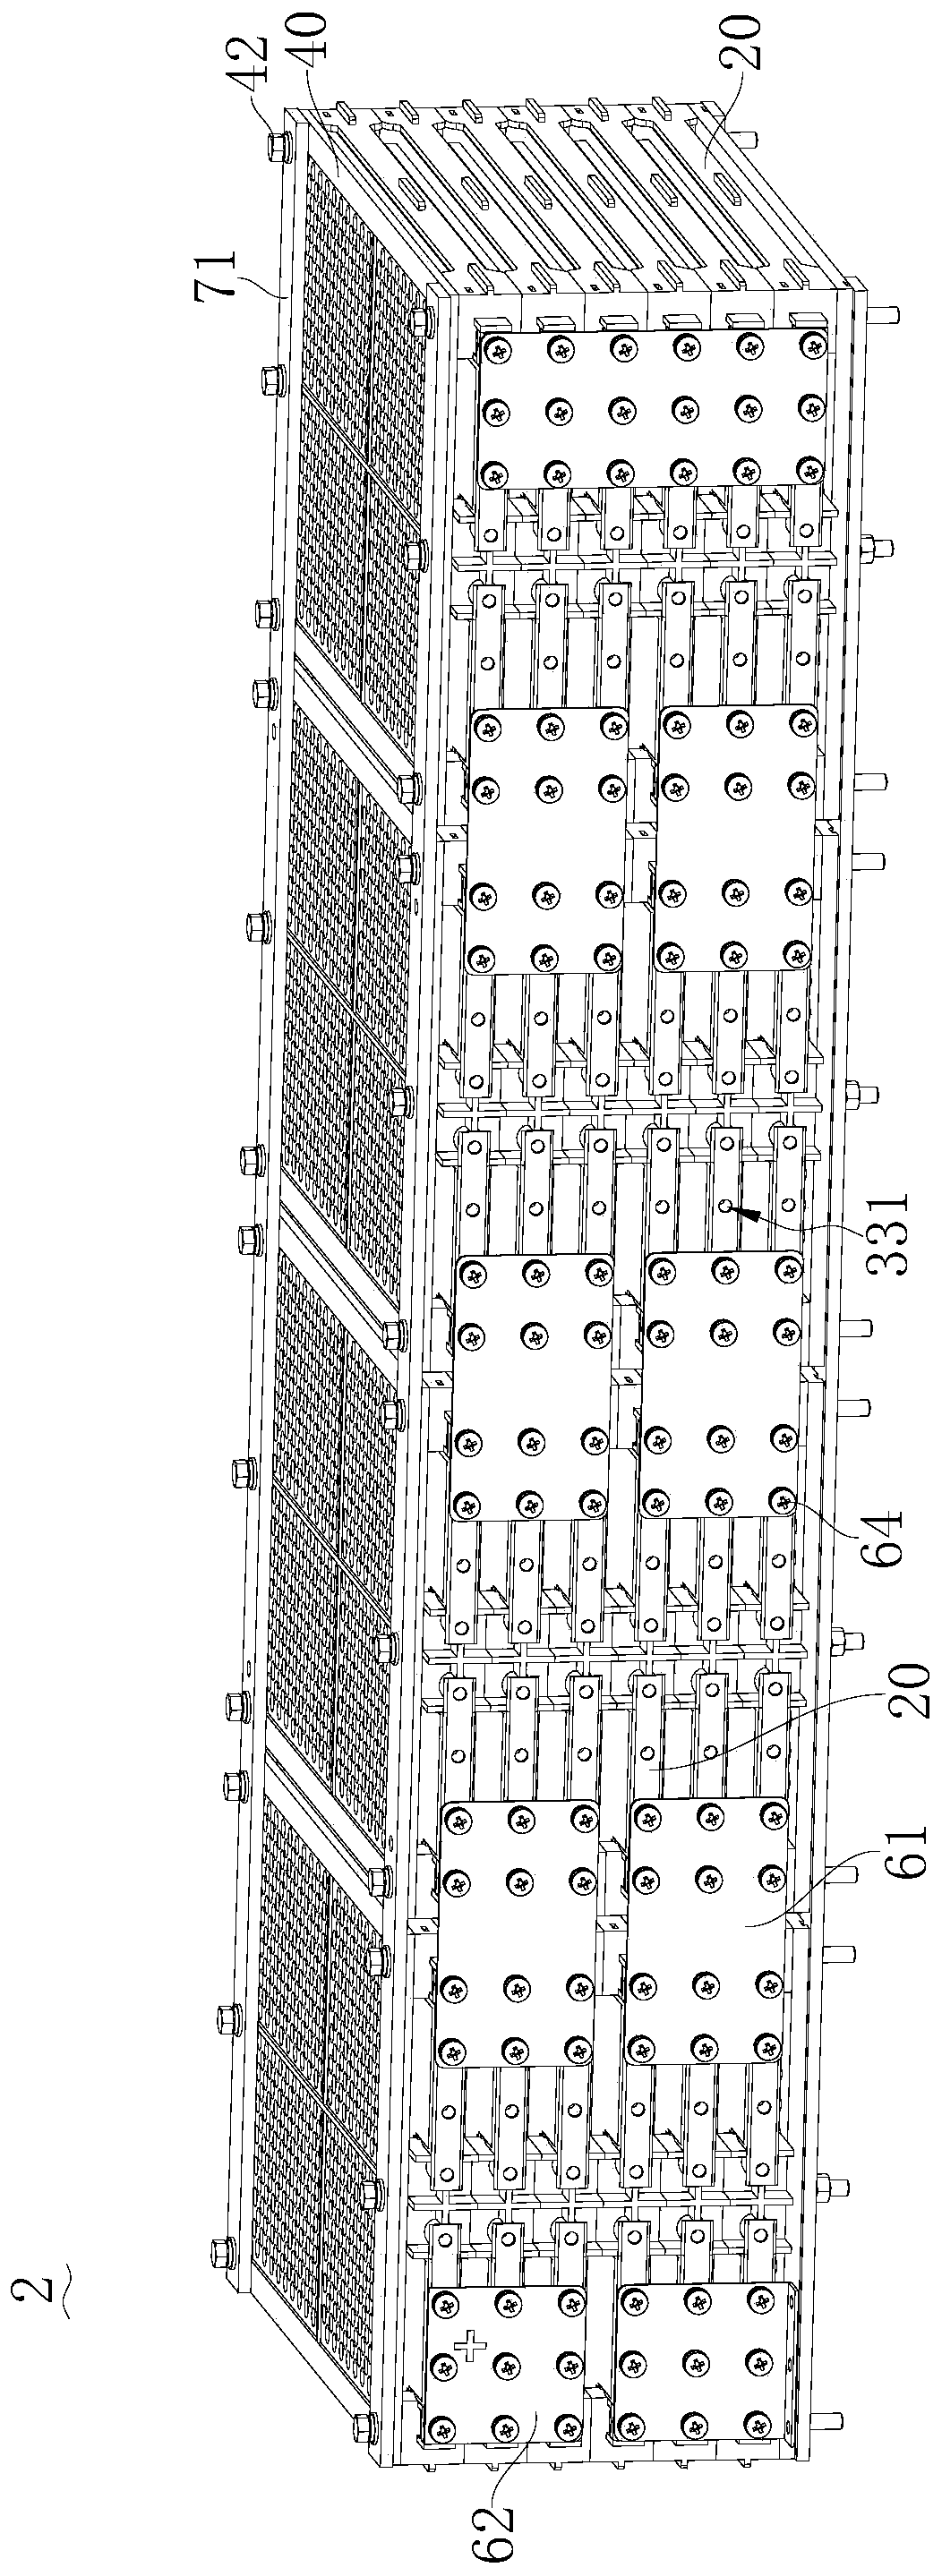 Lithium battery energy storage module and lithium battery energy storage module group